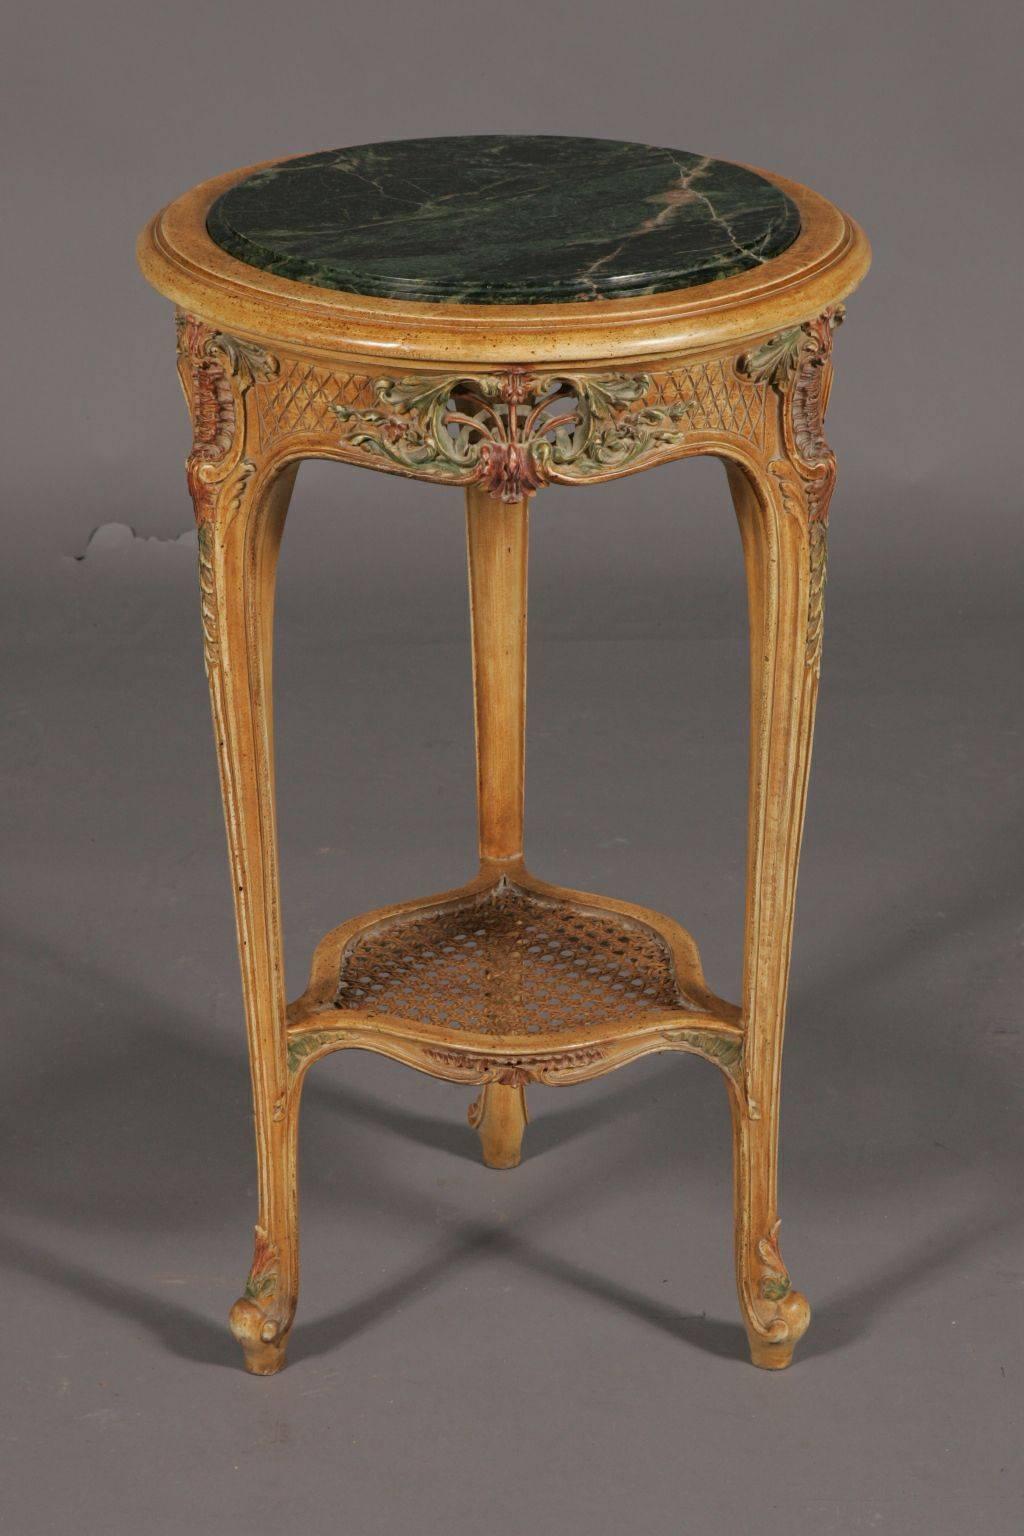 Excellent French occasional table in Louis XV style.
Highly valuable solid beechwood carved to the finest detail. Colored inlays and gilded.

(G-Sam-25).